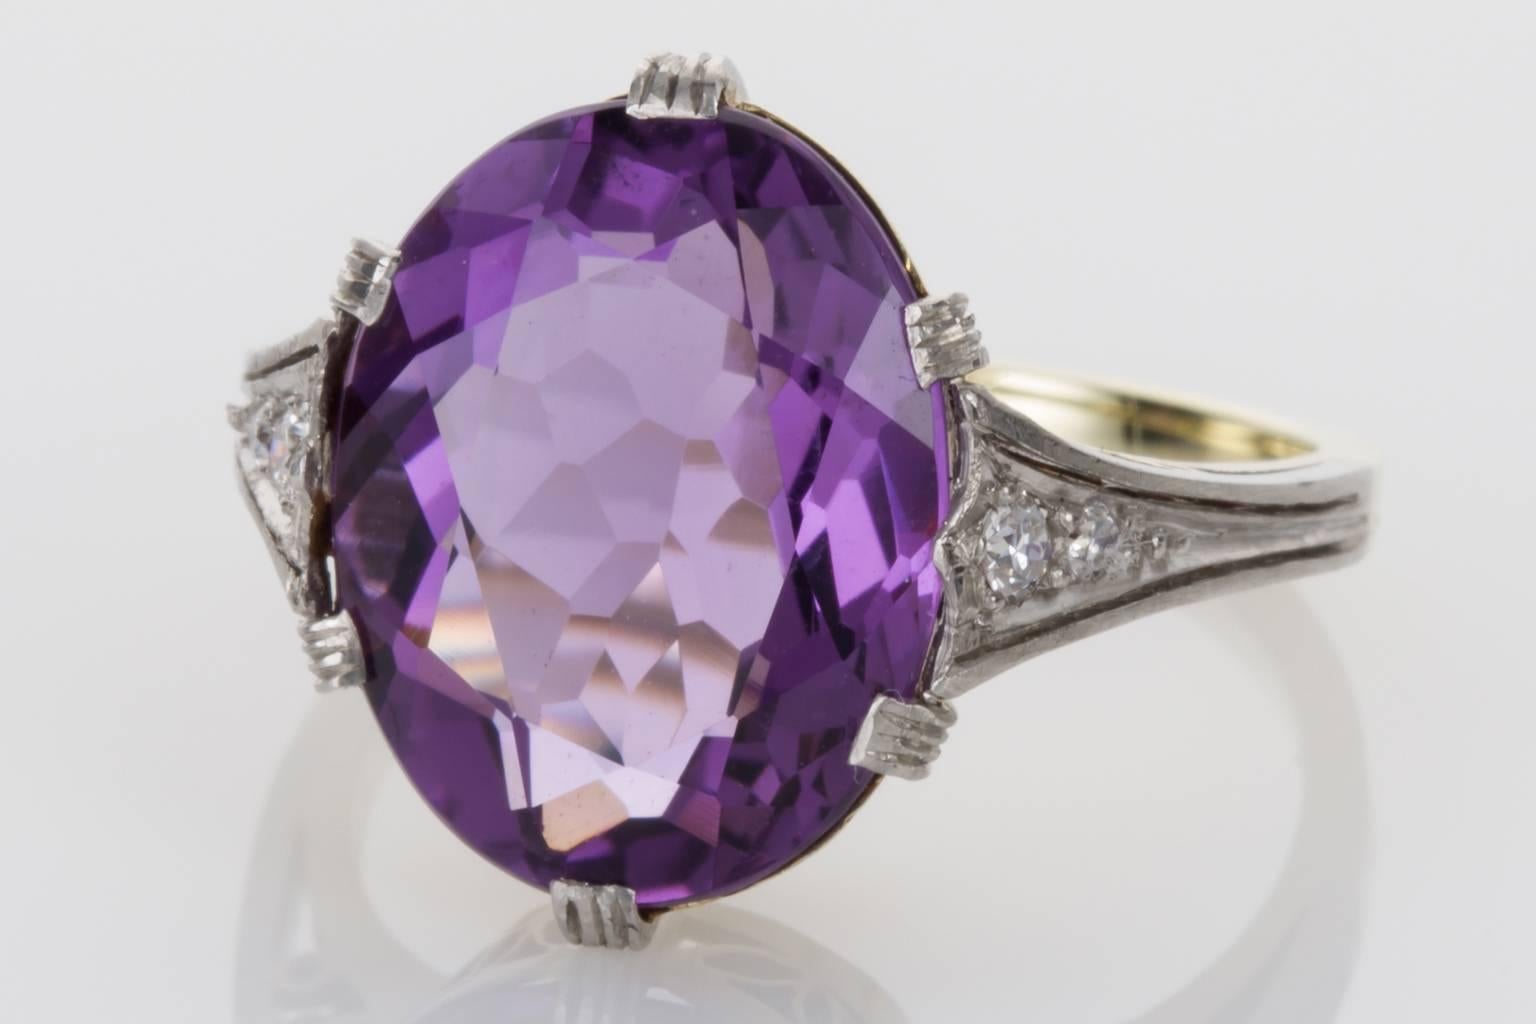 A beautiful ring with a pretty purple oval amethyst as its centrepiece. The amethyst shows gorgeous tones of lilac and purple and has a sparkle due to the cutting of the gemstone. Mounted in platinum and 14kt yellow gold the undergallery has fine